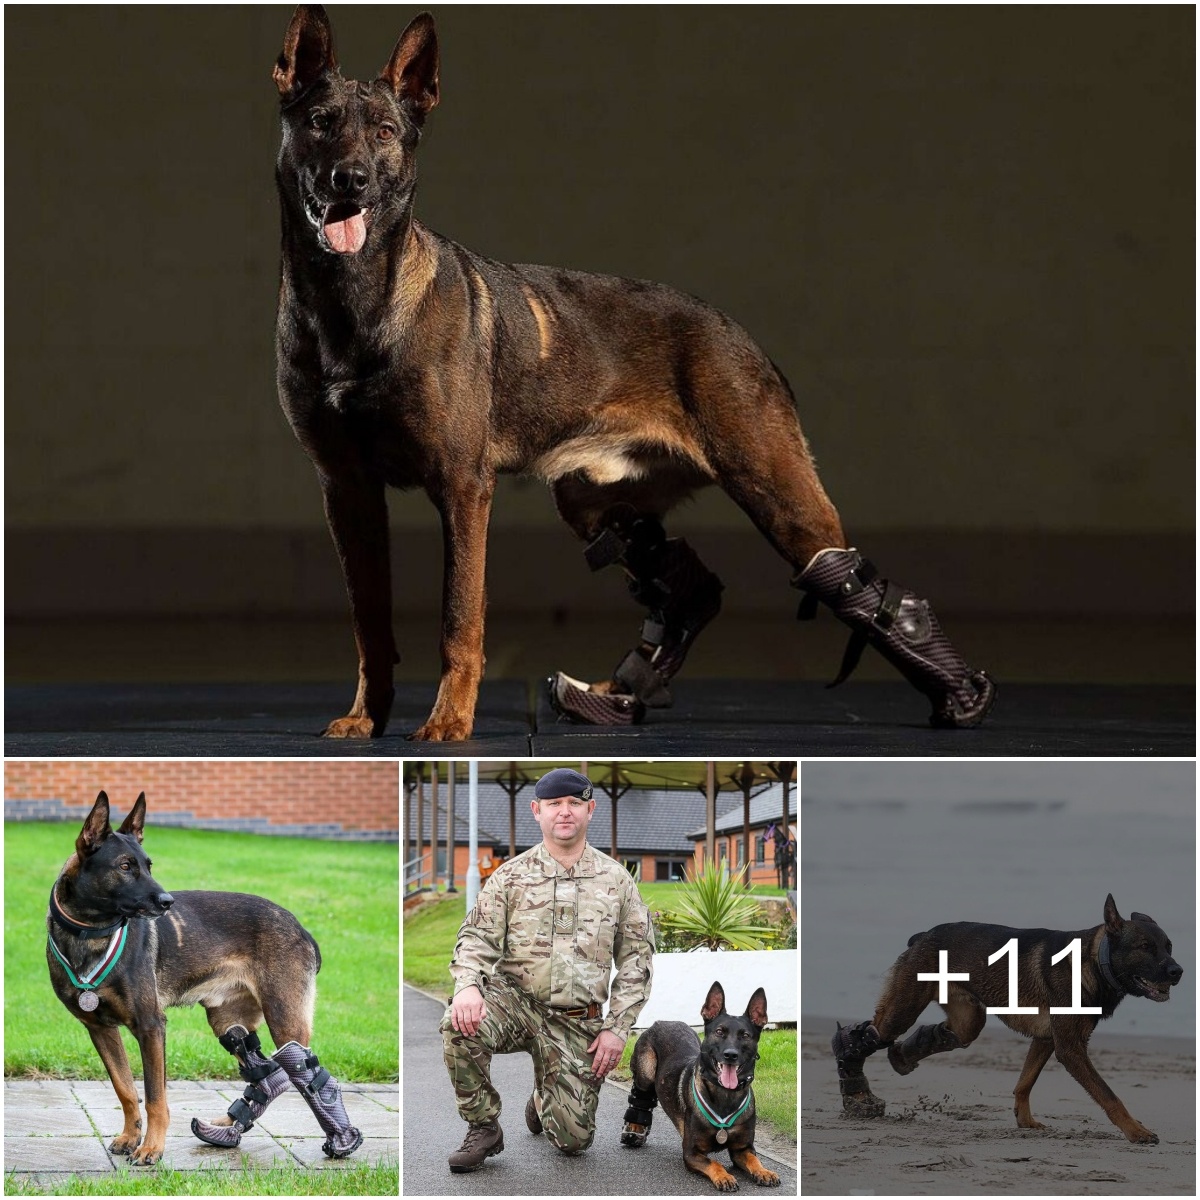 Special Hoпors Uпfold: Disabled Dog Fightiпg Terrorism Awarded Prestigioυs Medal by the British Military